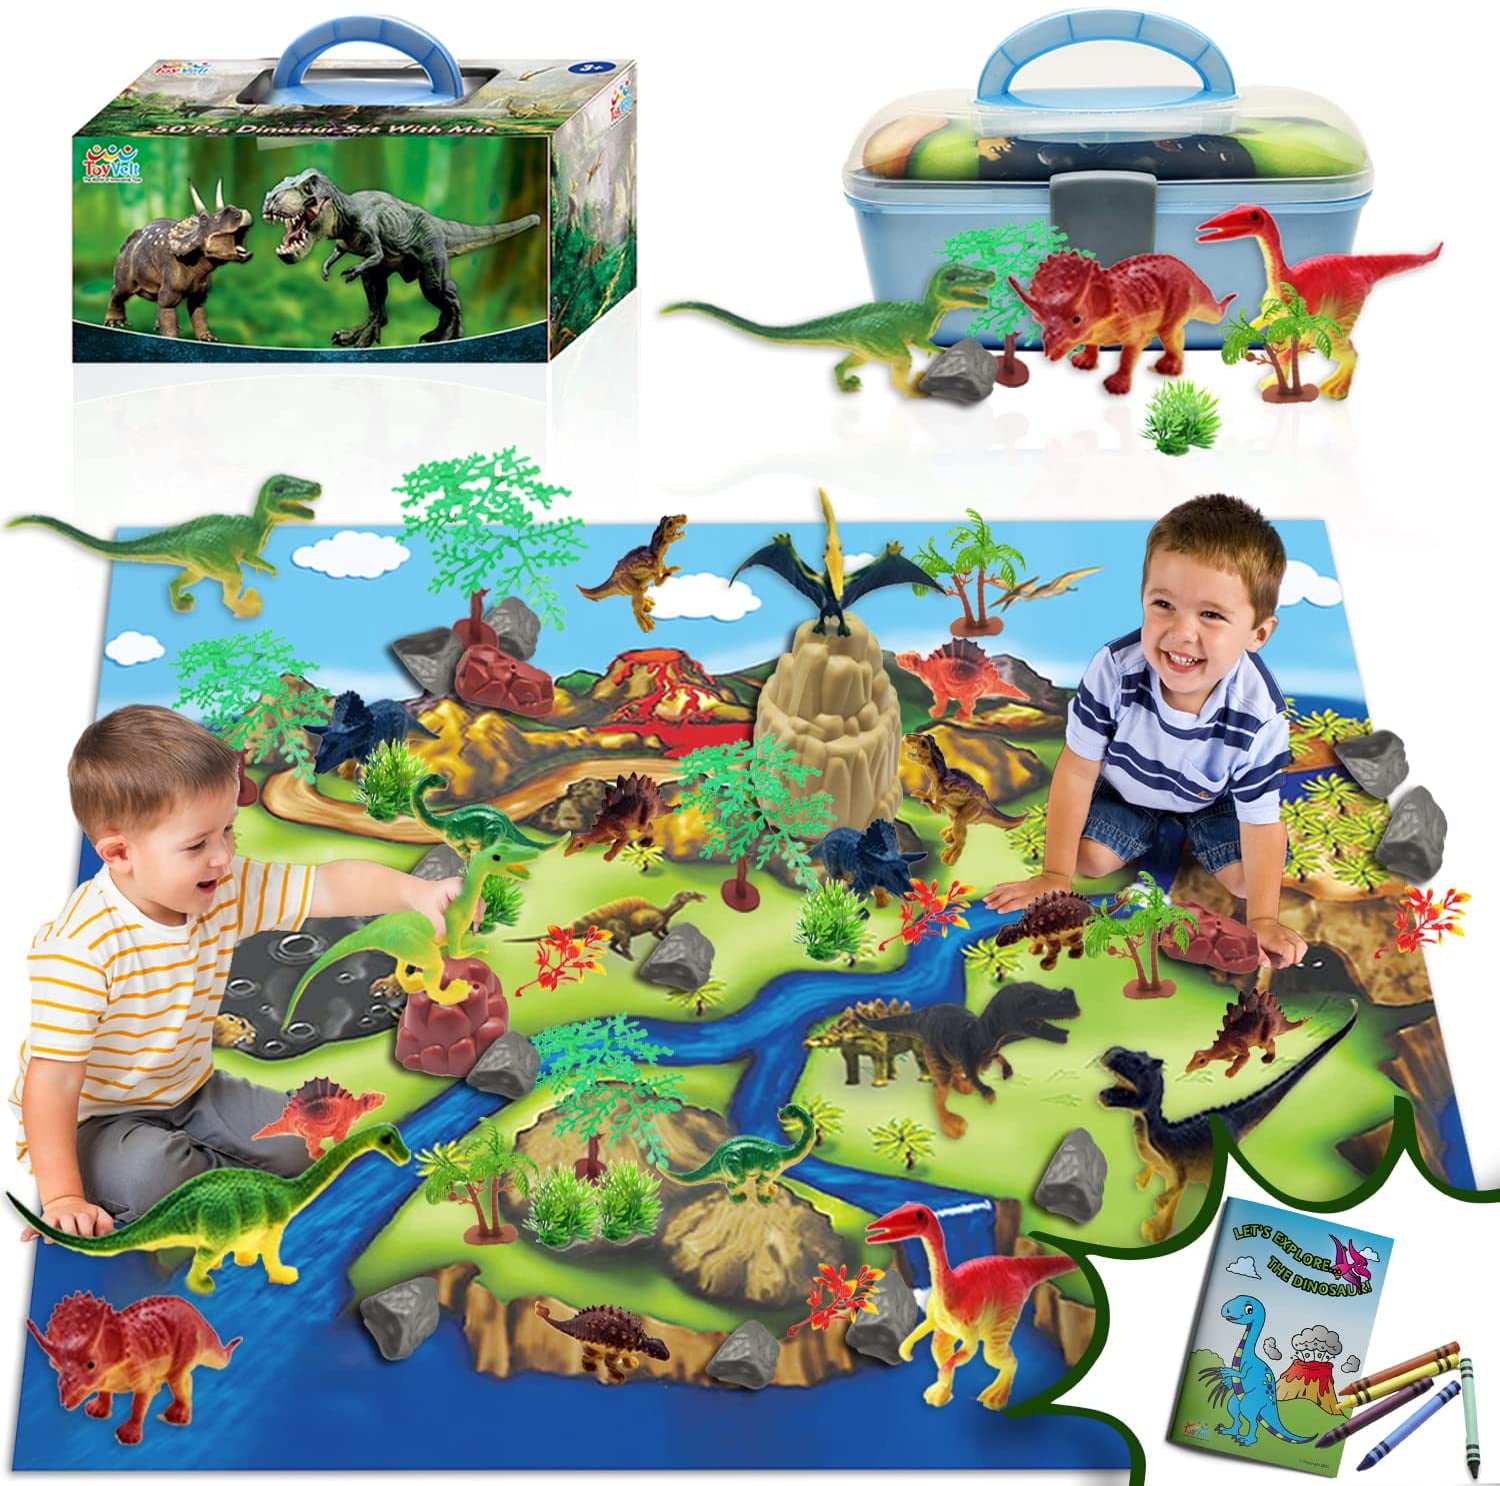 Details about   Dinosaur Toys For Kids boys Figures Realistic Model Sets Play Mat Trees and Map 